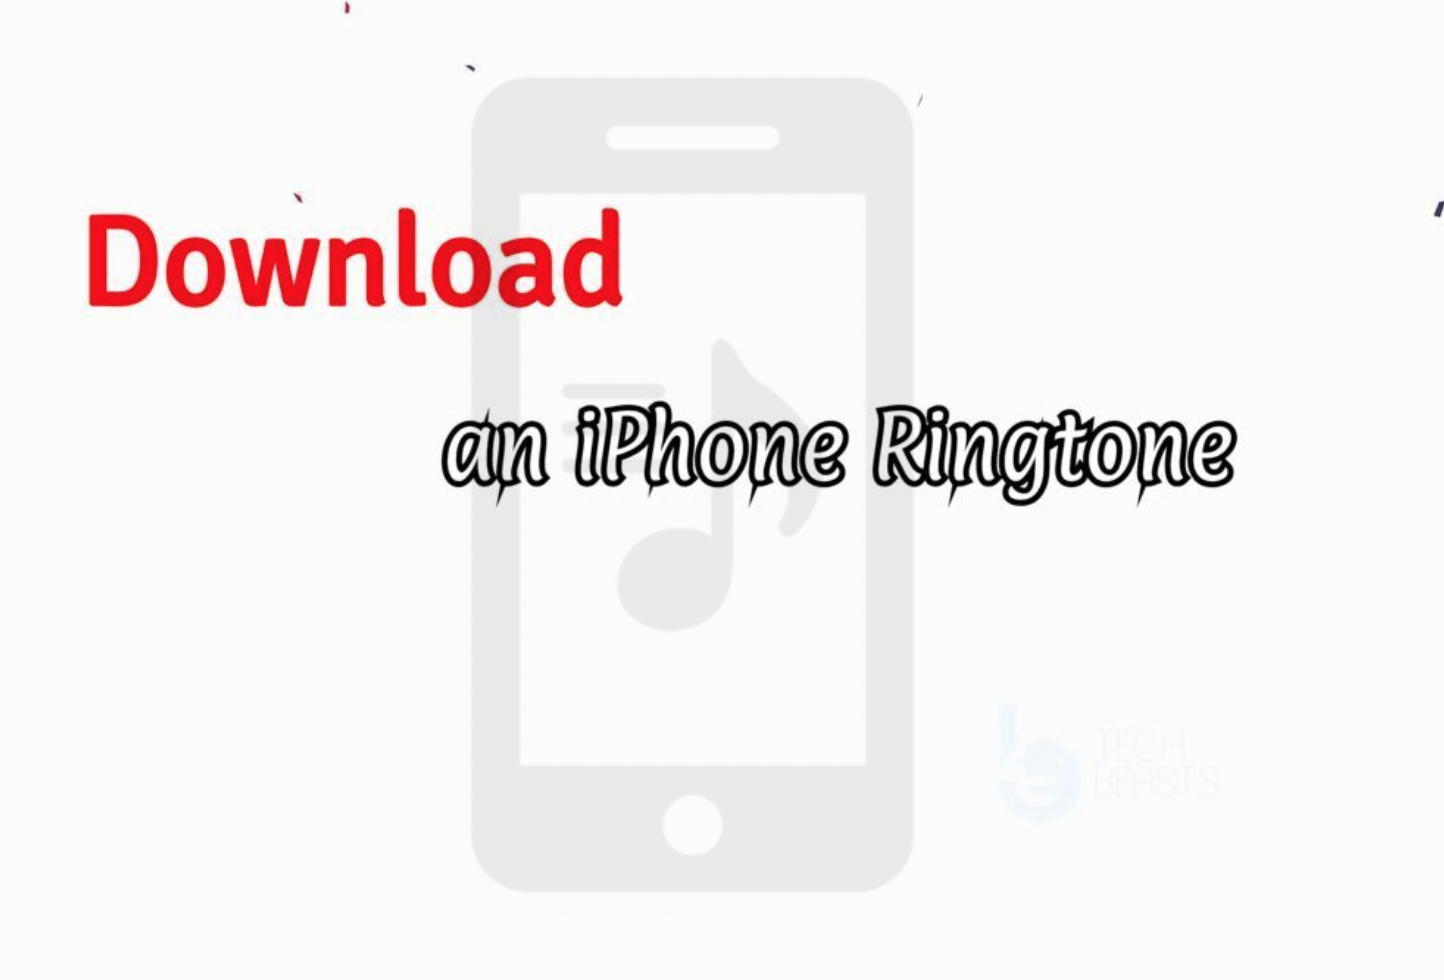 Download an iPhone Ringtone